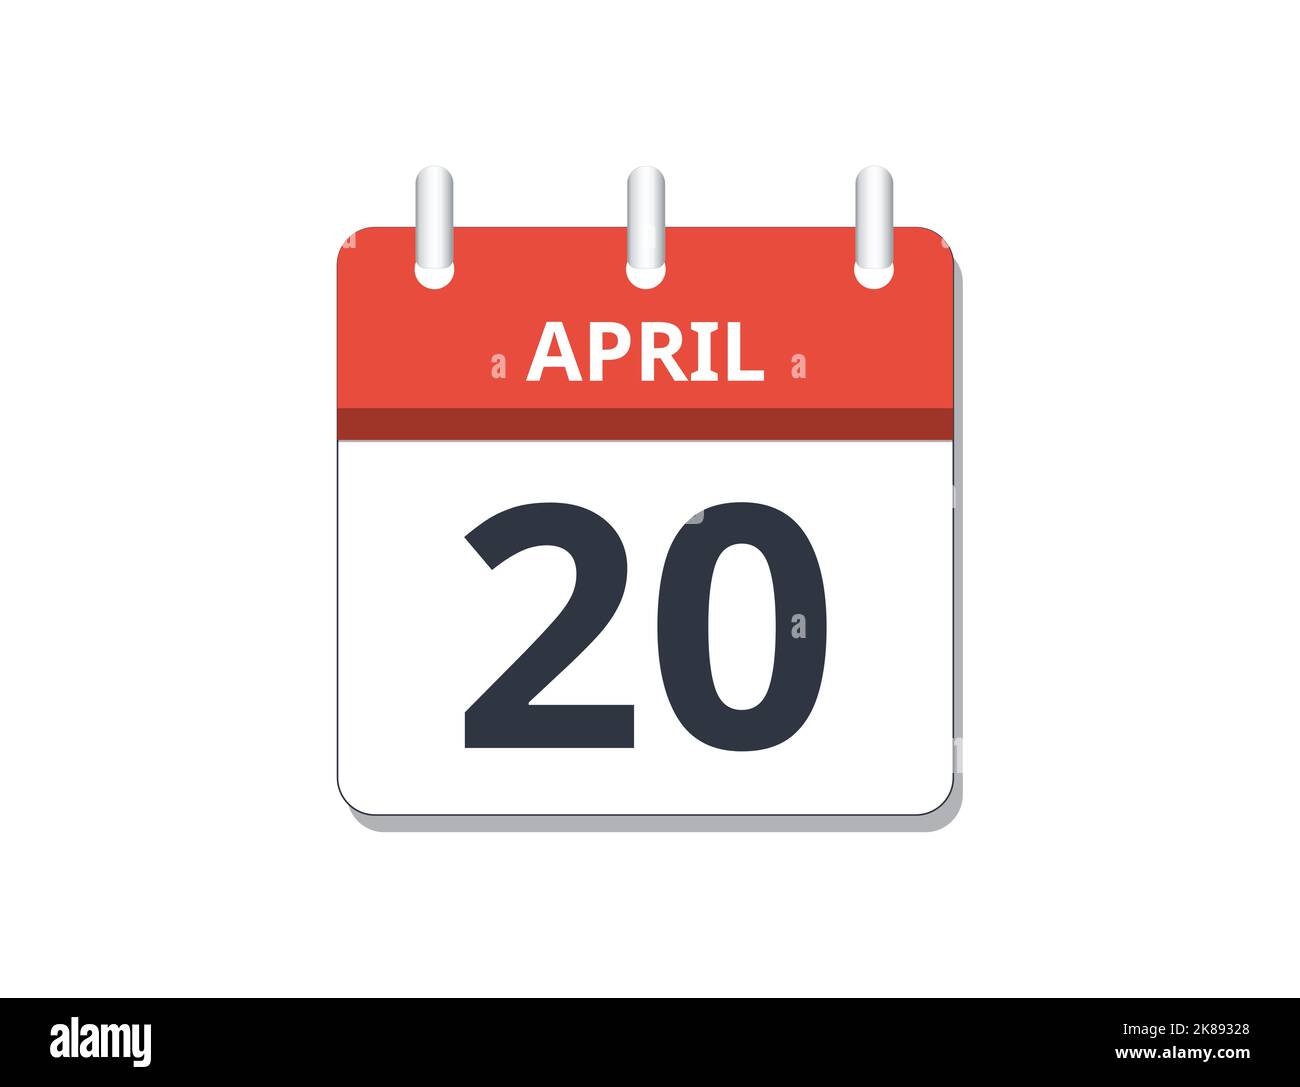 April 20th calendar icon vector. Concept of schedule, business and